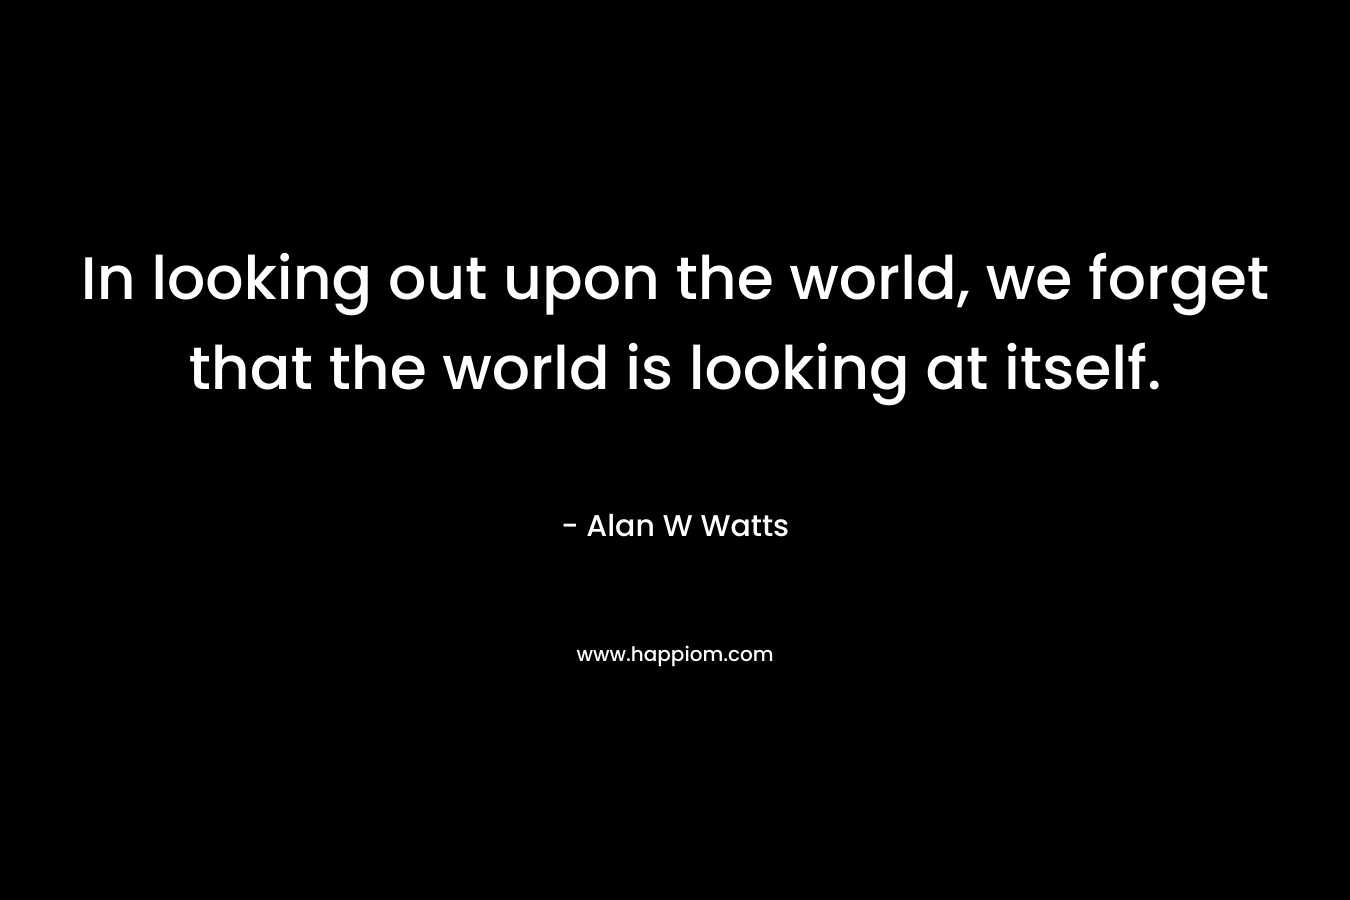 In looking out upon the world, we forget that the world is looking at itself.